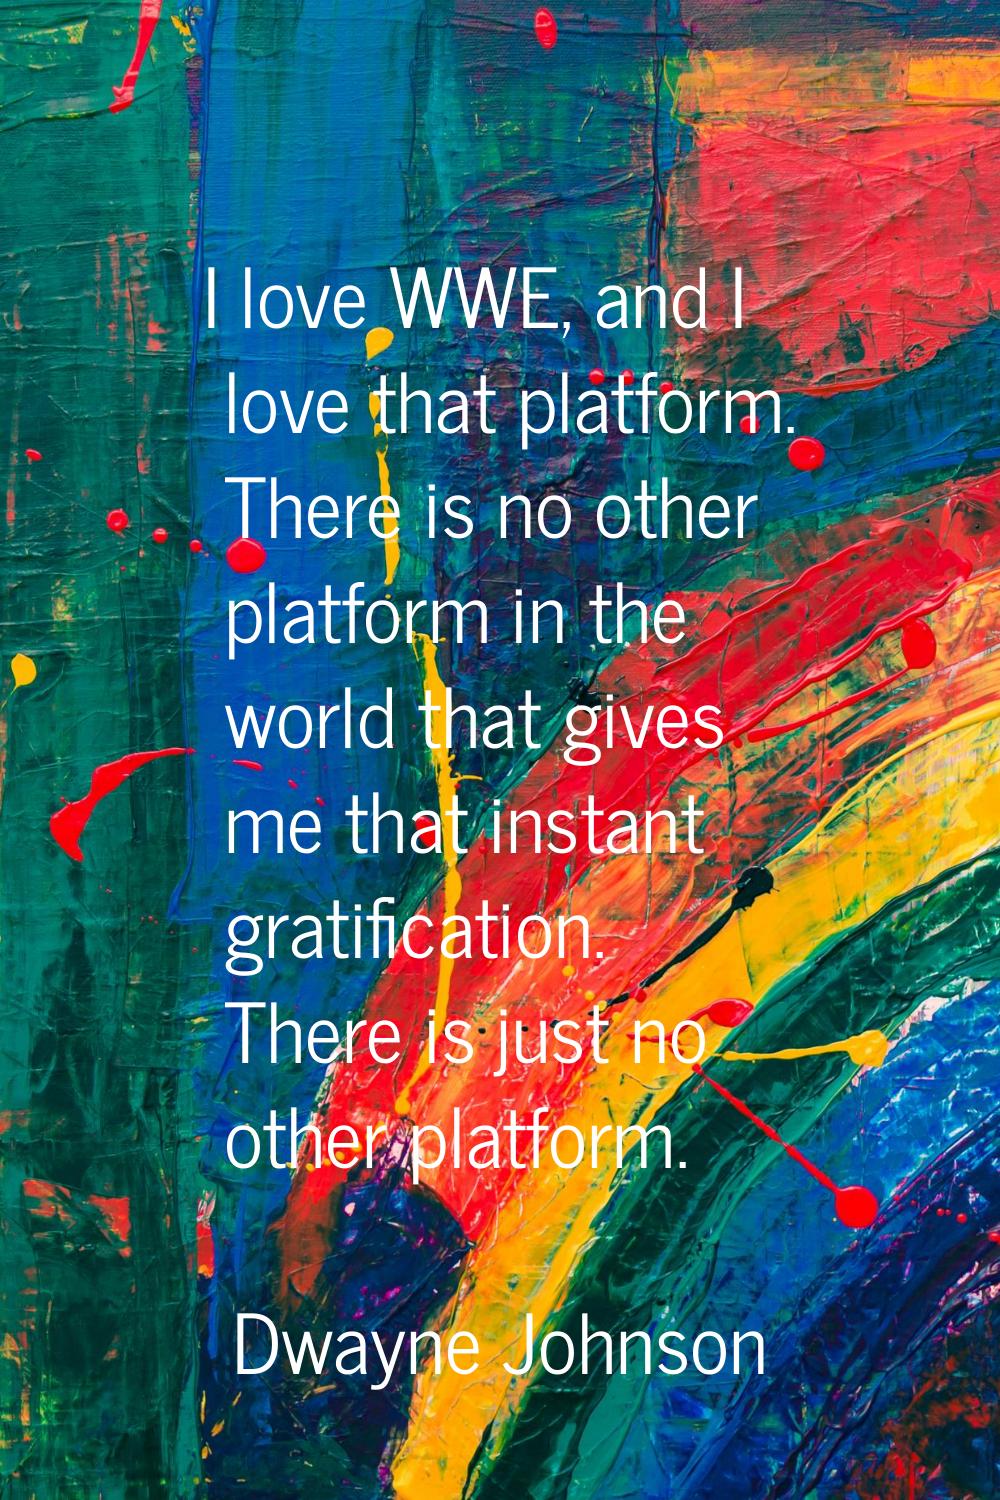 I love WWE, and I love that platform. There is no other platform in the world that gives me that in